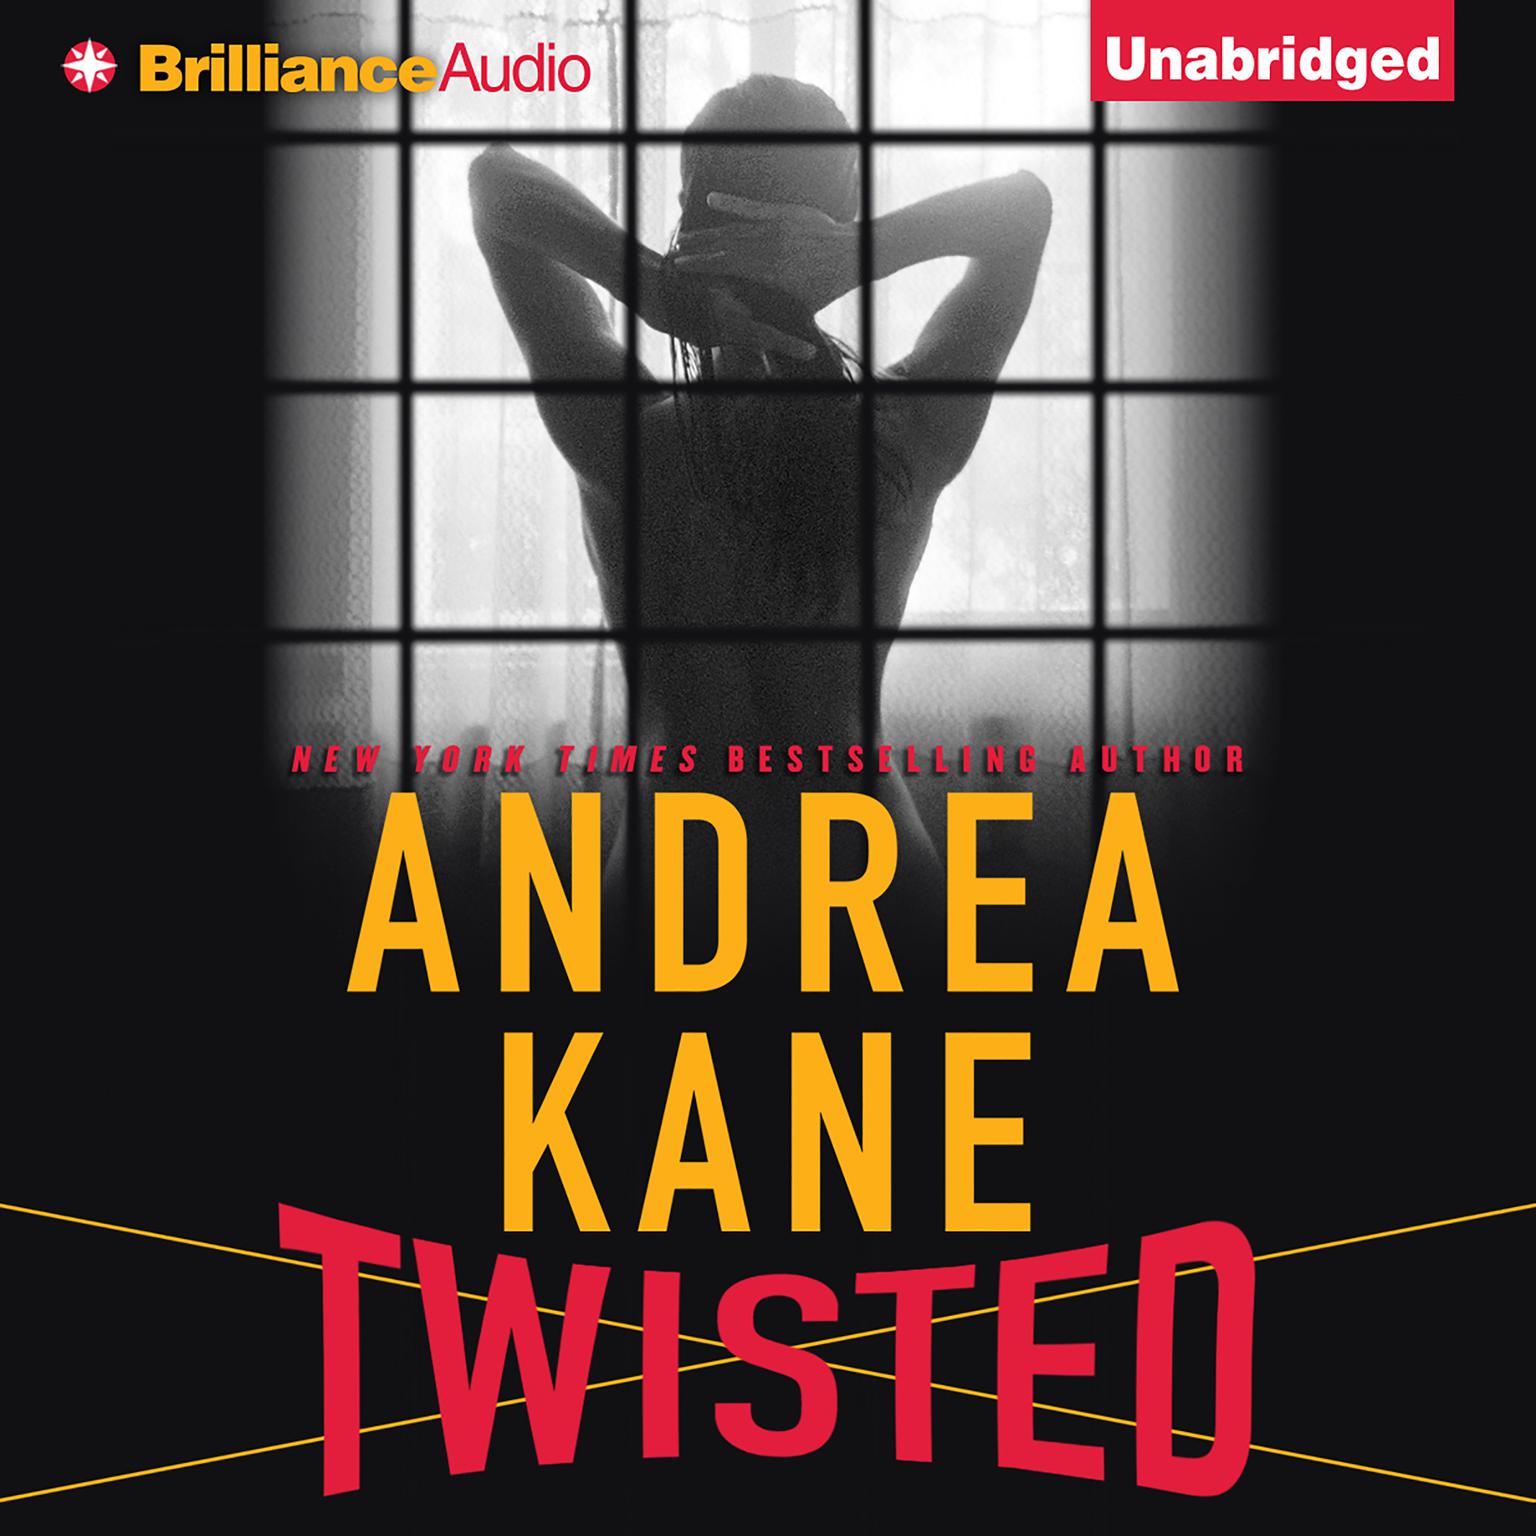 Twisted Audiobook, by Andrea Kane